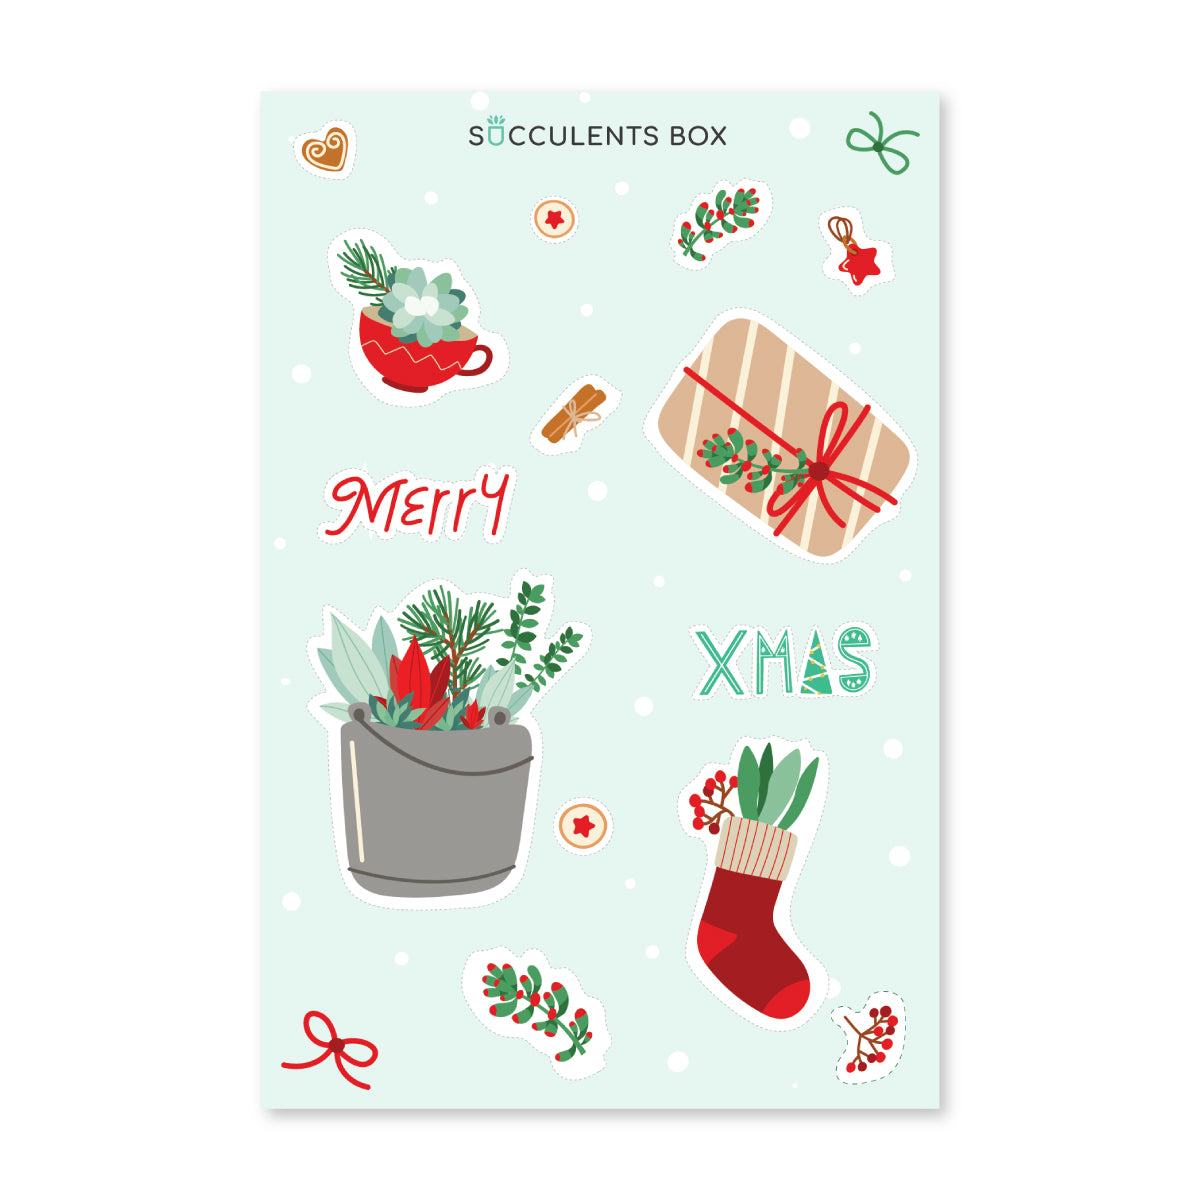 succulent stickers, Merry Christmas sticker, sticker with succulent theme, stickers for gift making and crafting. Christmas gift idea